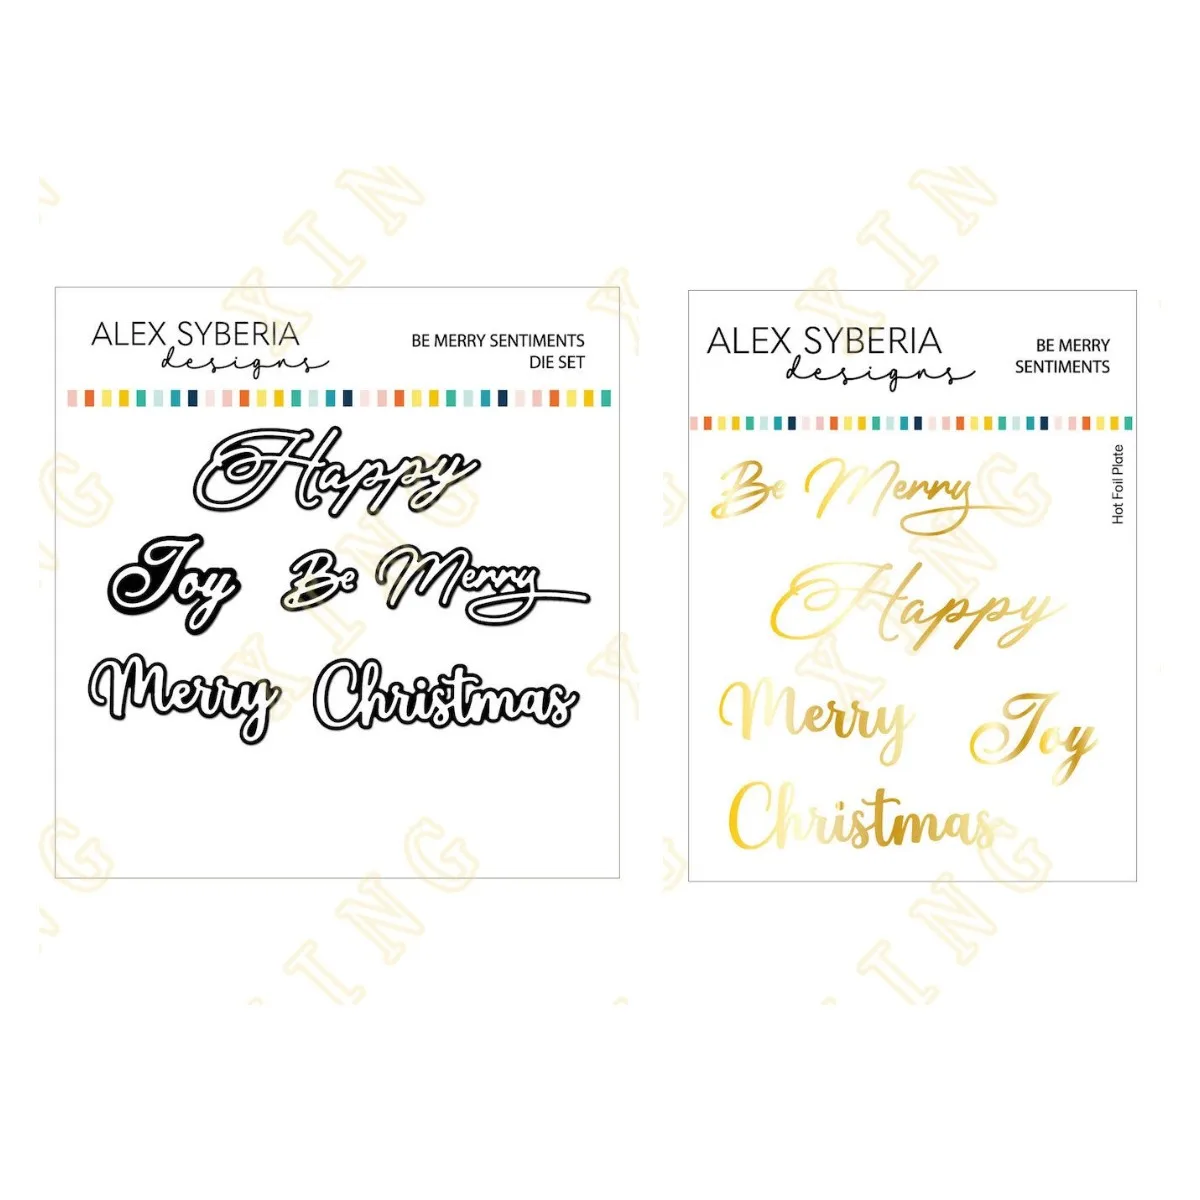 

New Be Merry Sentiments Metal Cutting Dies Solid Hot Foil Plate Scrapbook Diary Decoration Embossing Template DIY Greeting Card